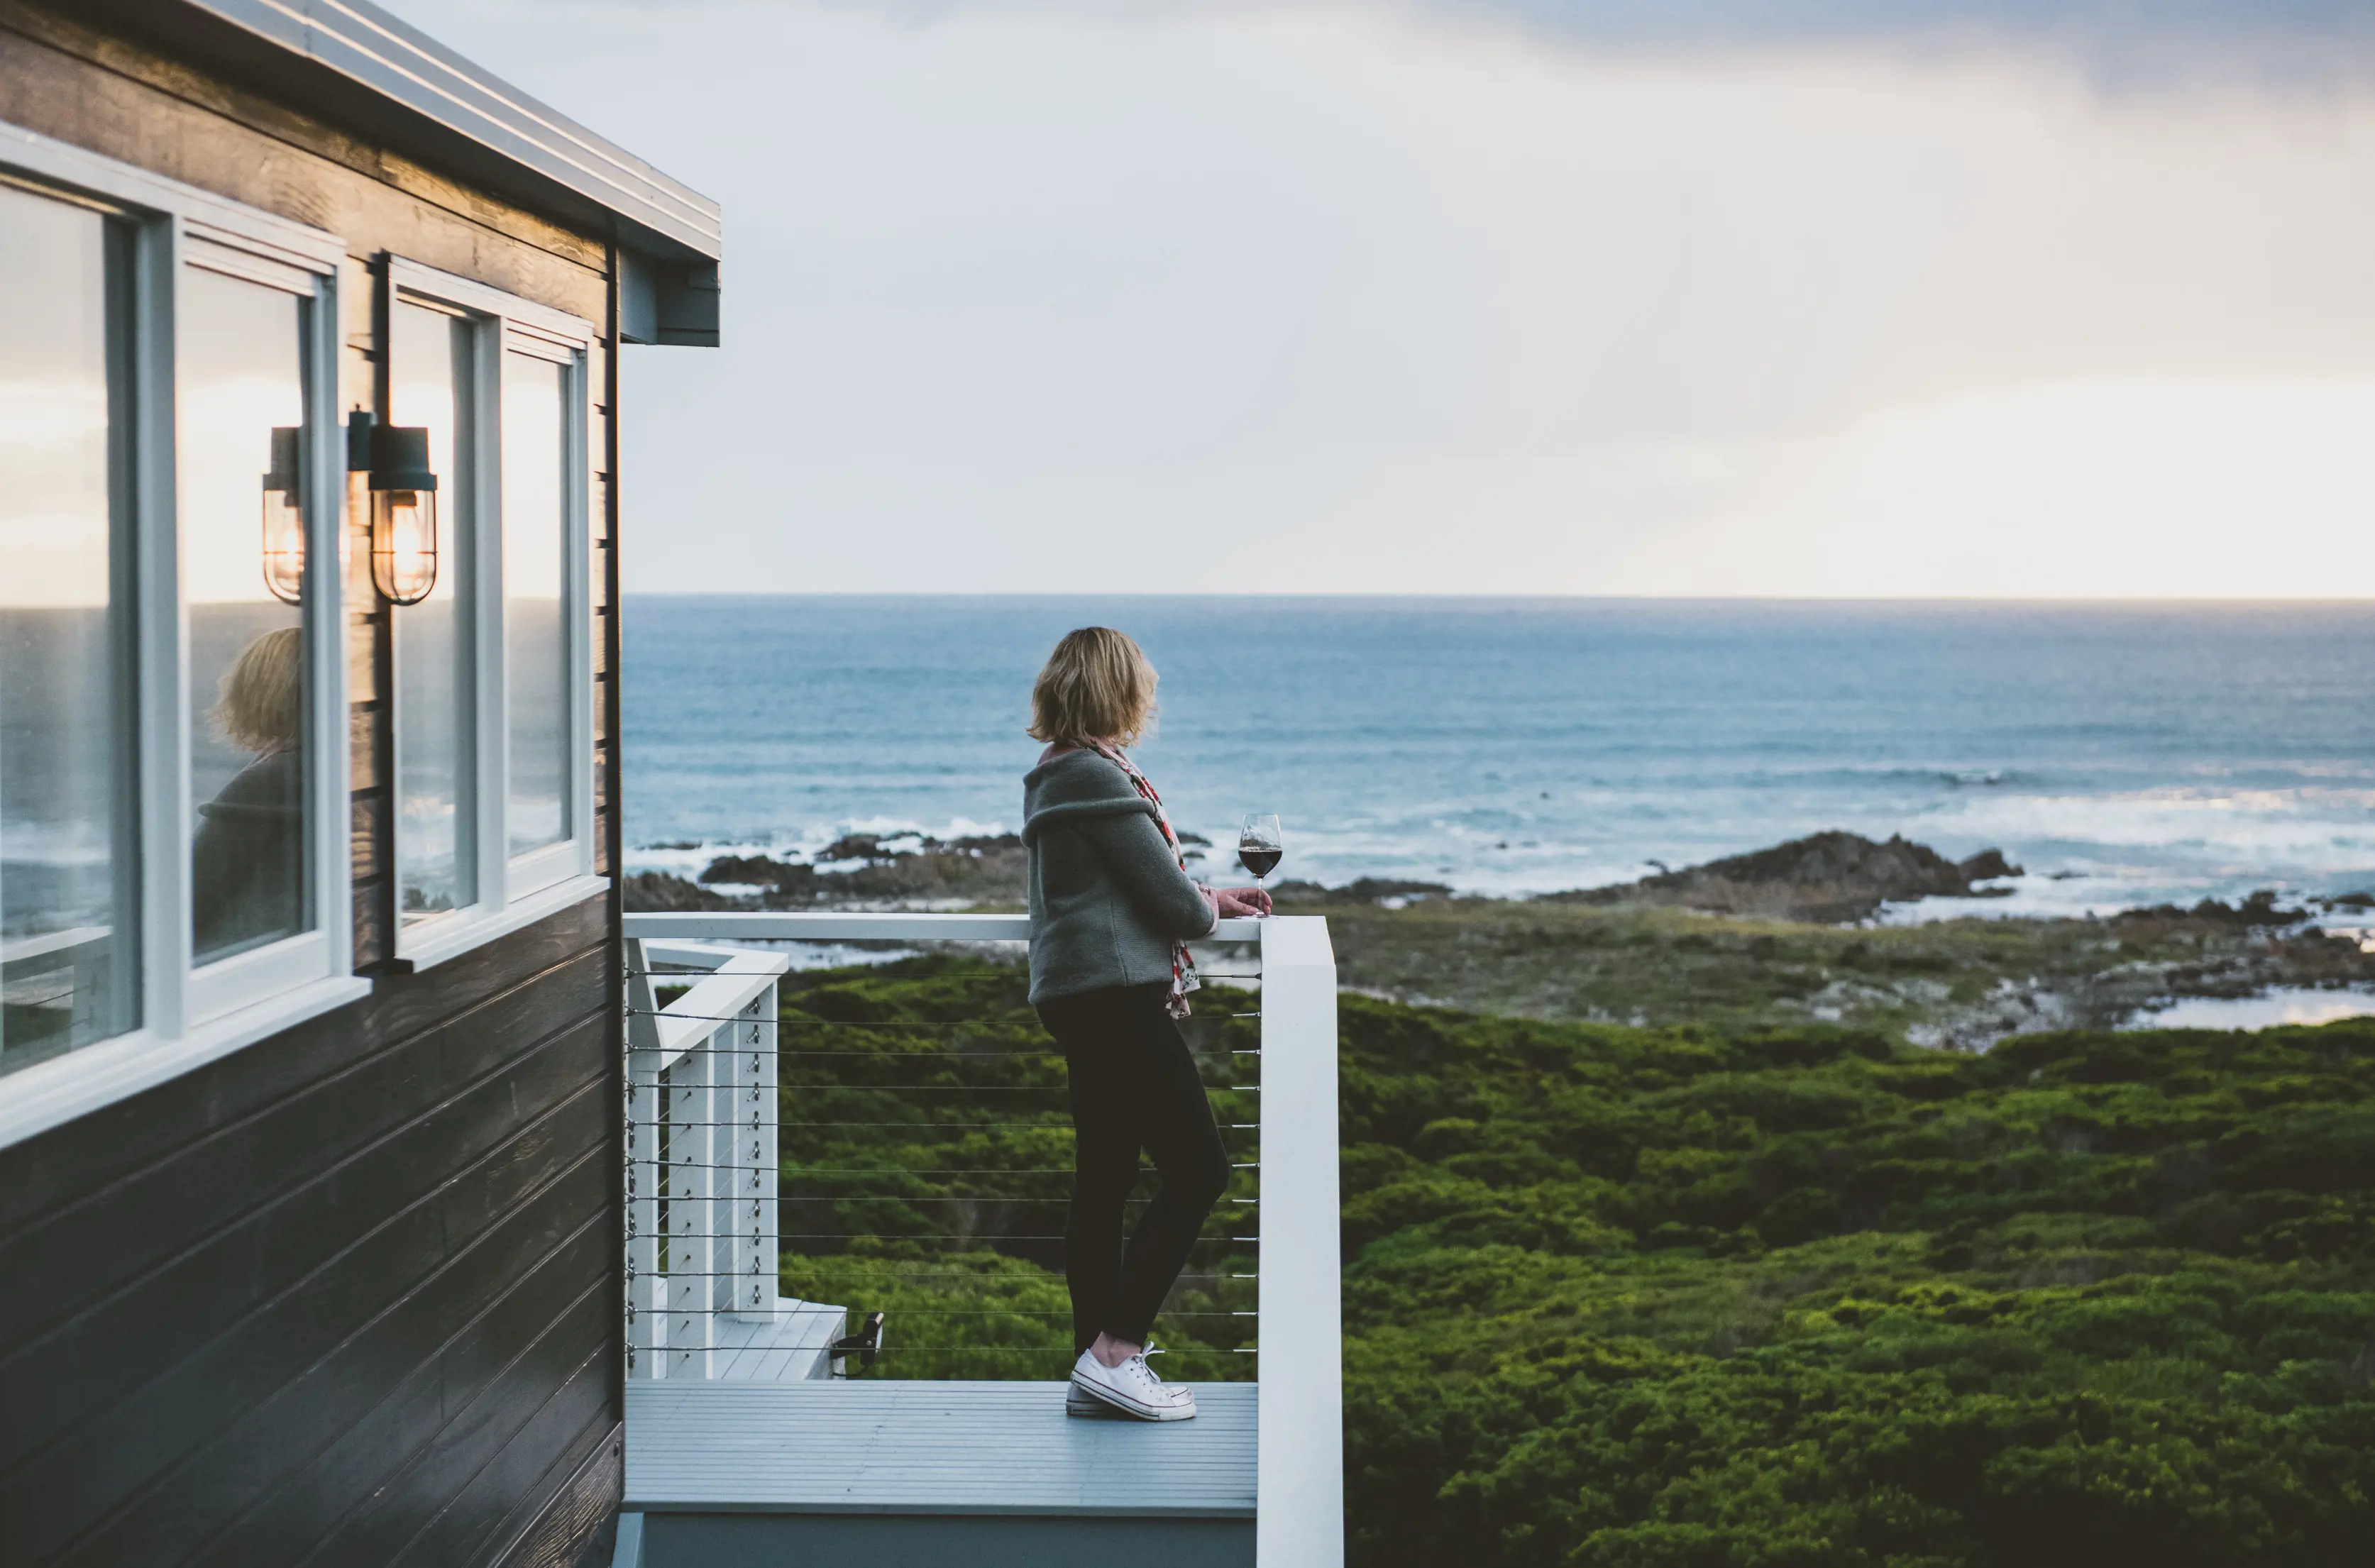 A woman leans on the balcony outside the Taraki Lodge, looking out the ocean and landscape.